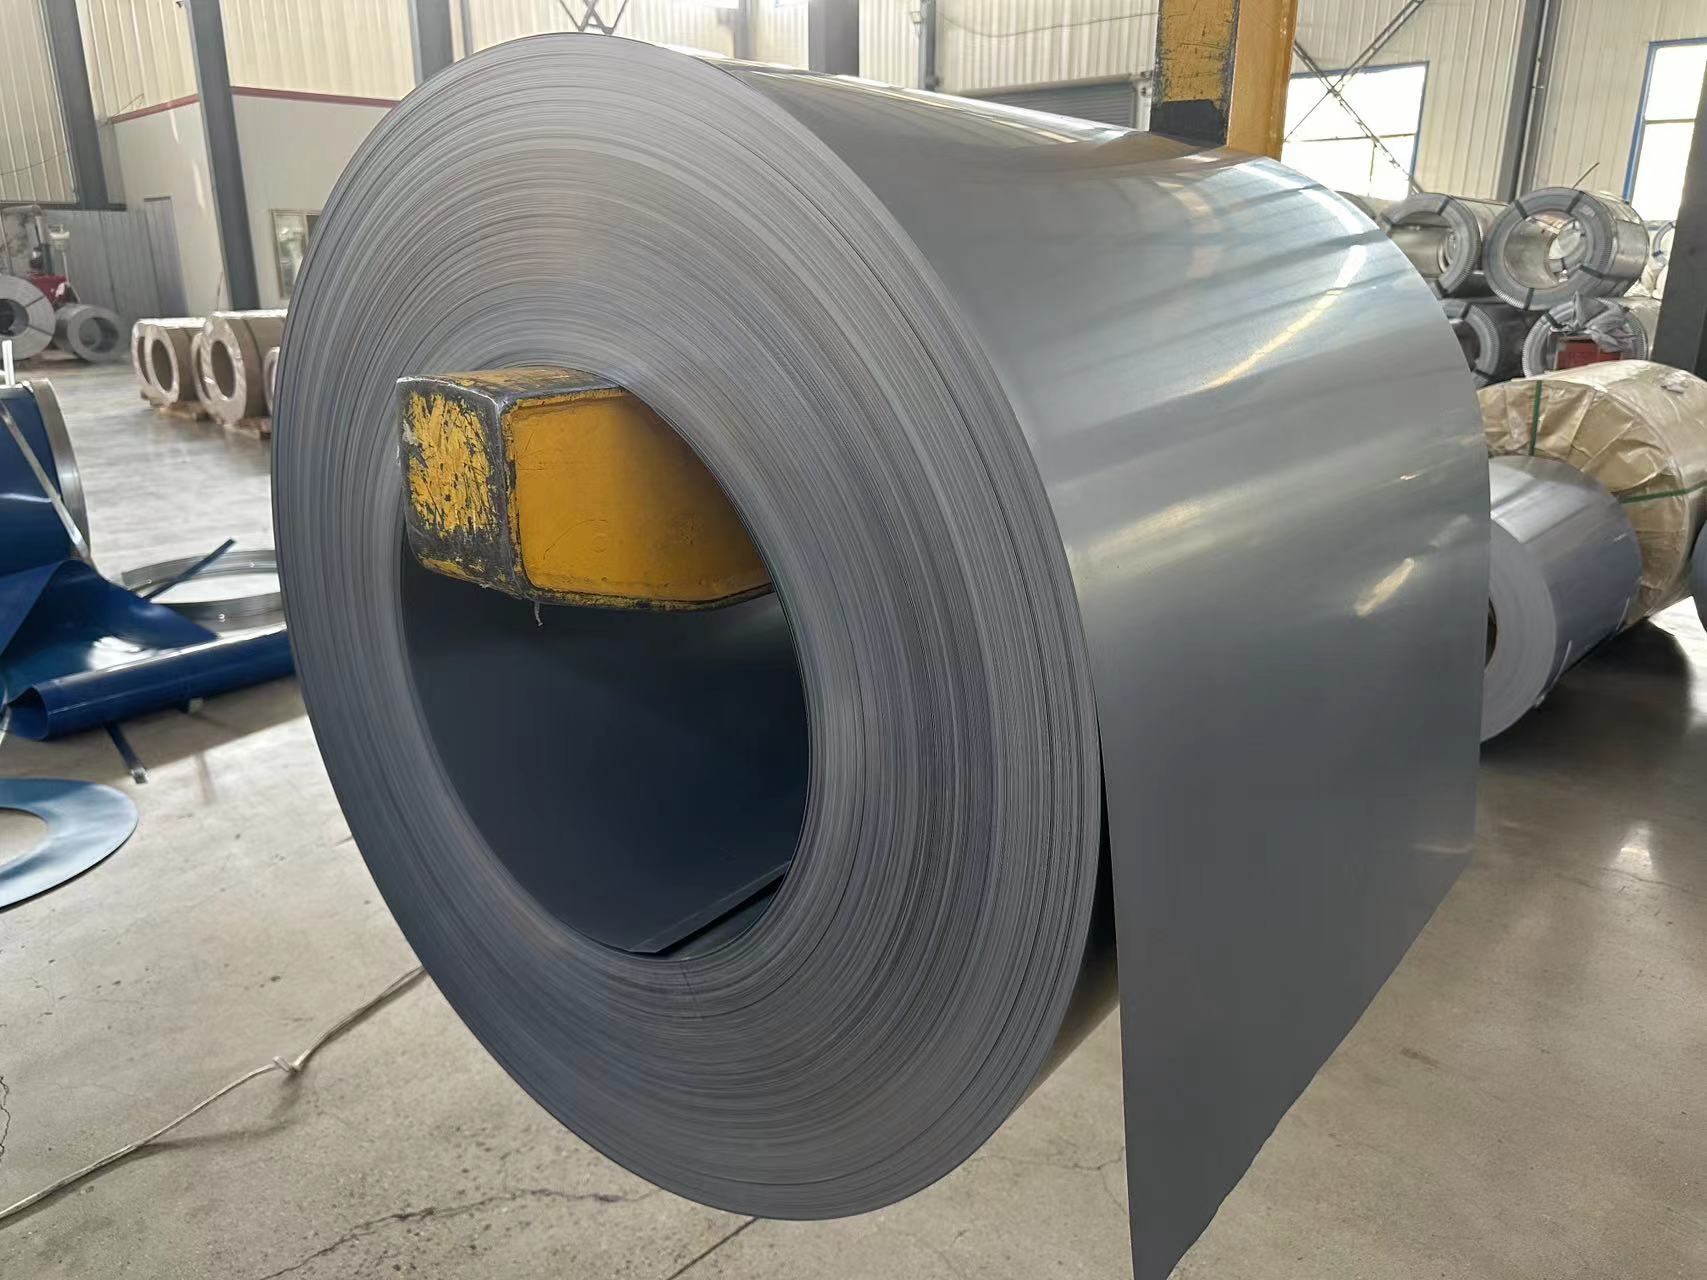 Silicon steel, often called electrical steel, is a specialized steel alloy containing silicon in varying amounts.